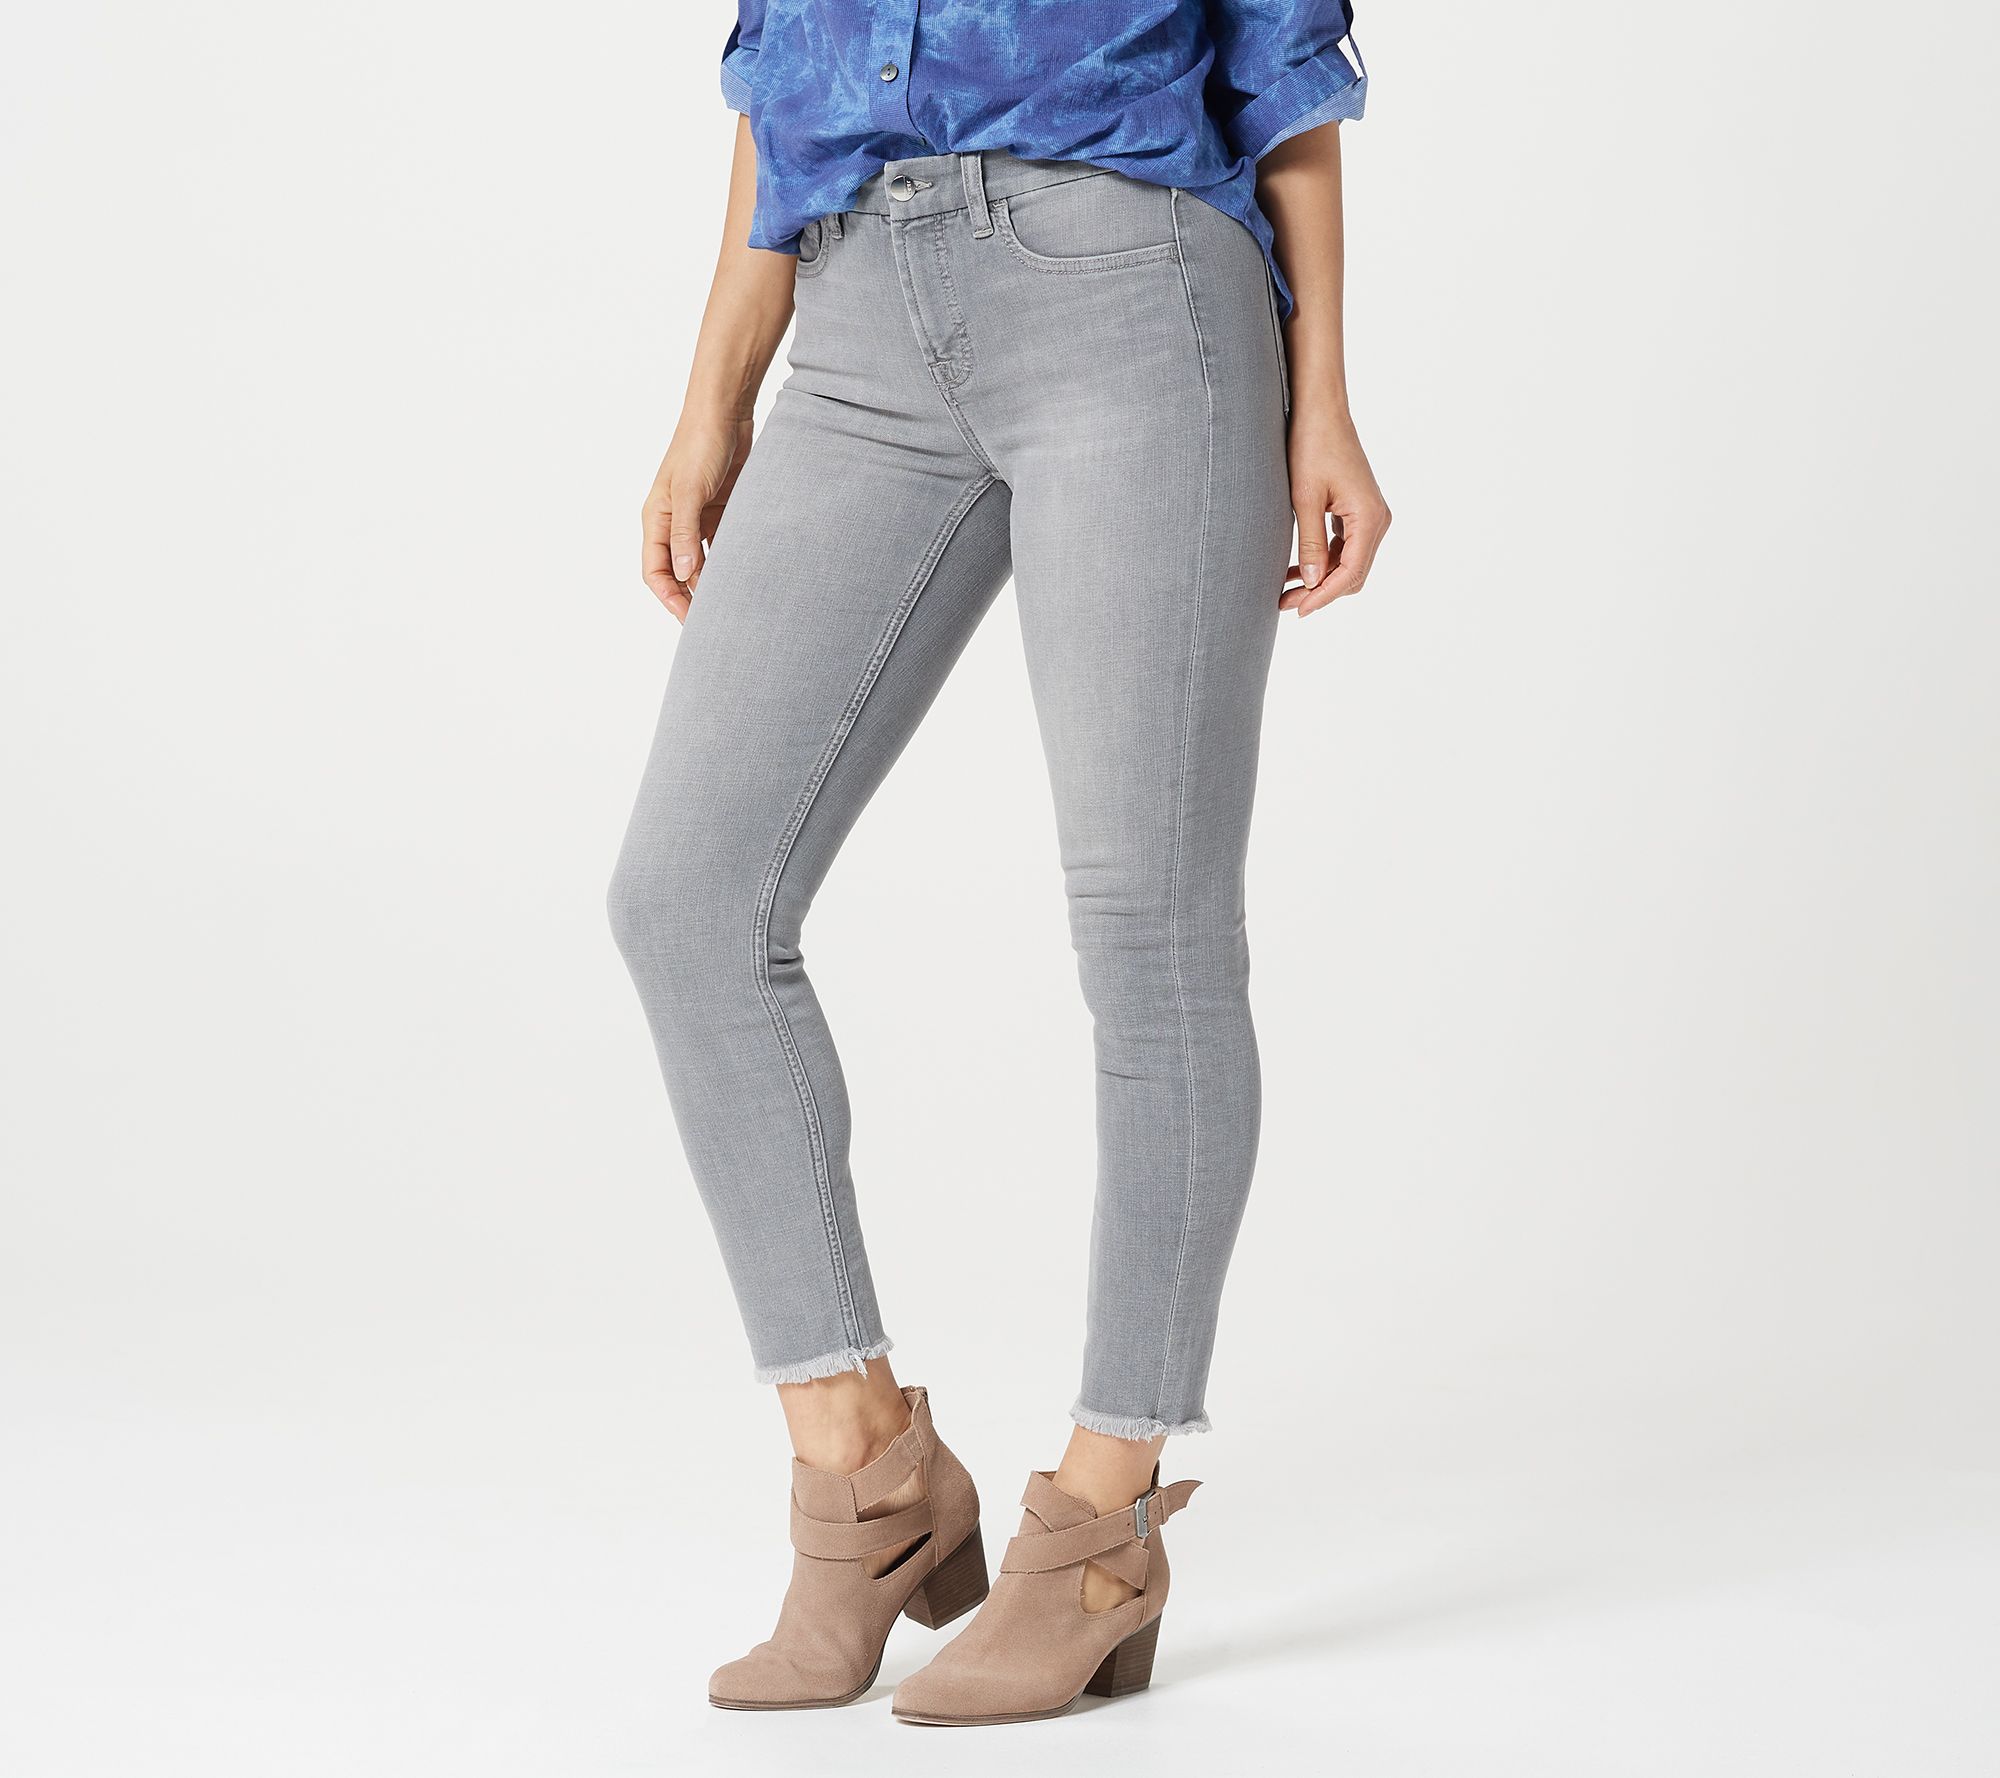 7 for all mankind ankle skinny